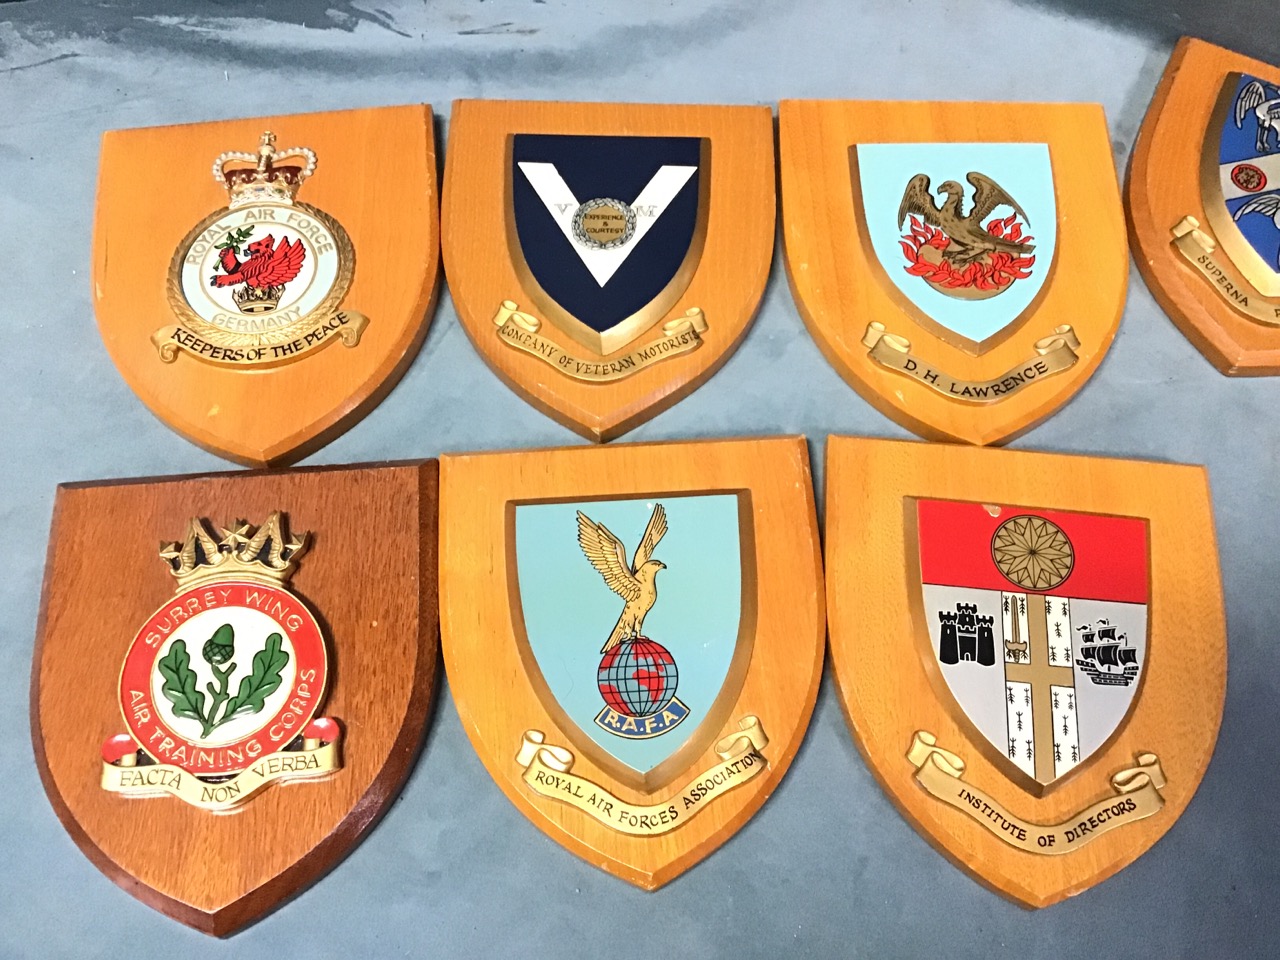 Miscellaneous military and civil armorial shields - Home Guard, RAF College Cranwell, Air Training - Image 3 of 3